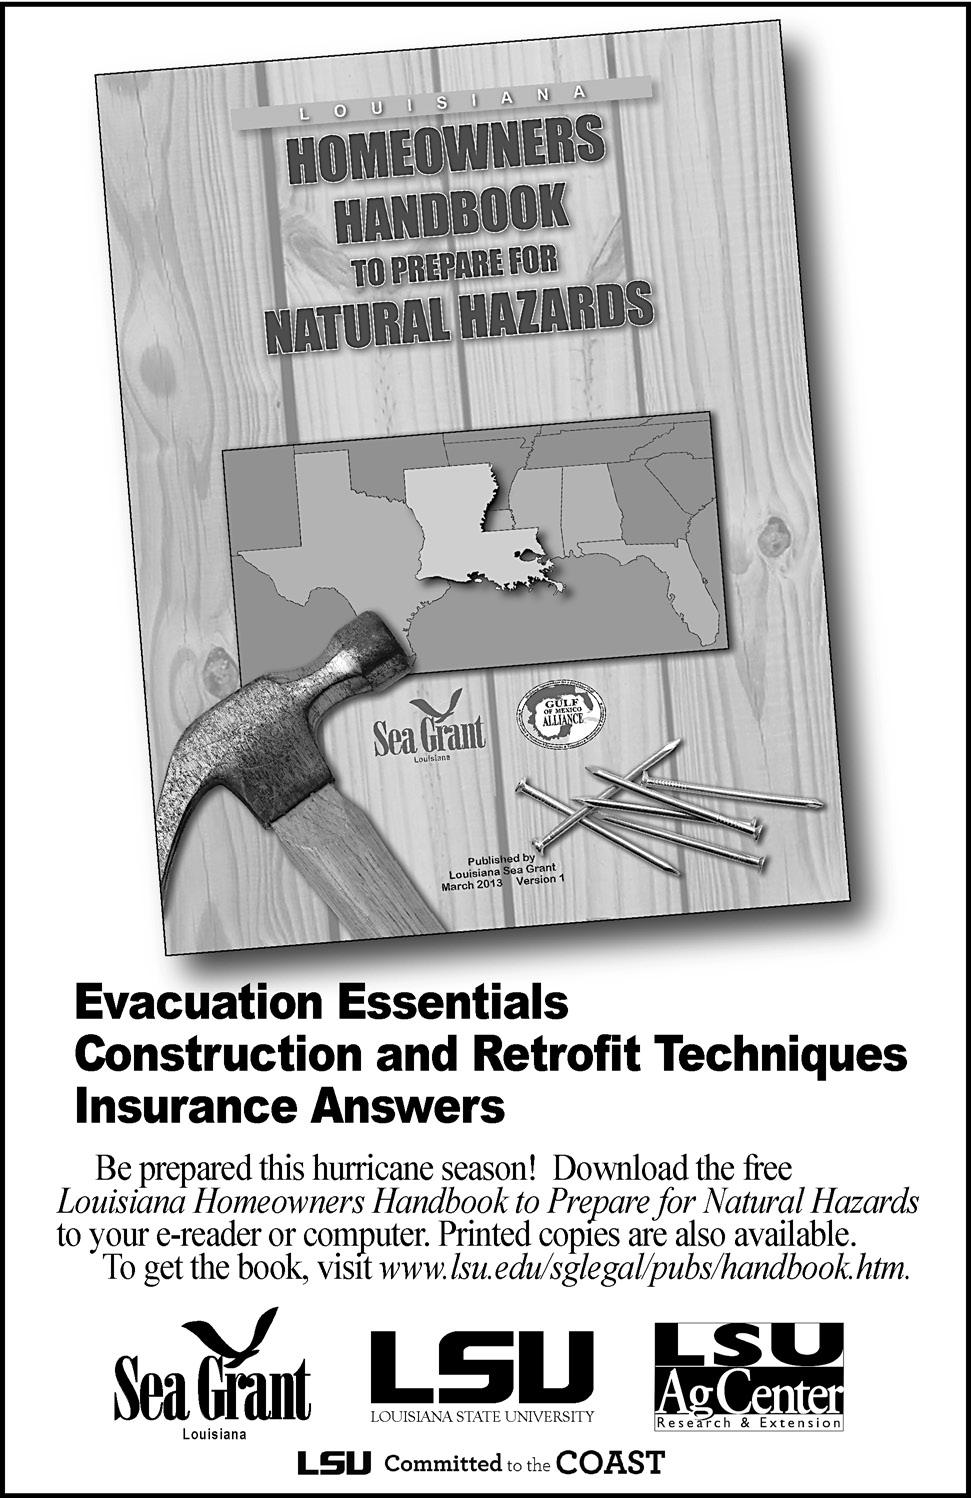 Free Handbook Shows Homeowners How to Prepare for Hazards South Louisiana has reached what is usually the most active months of hurricane season, and now is the time for homeowners to make sure they